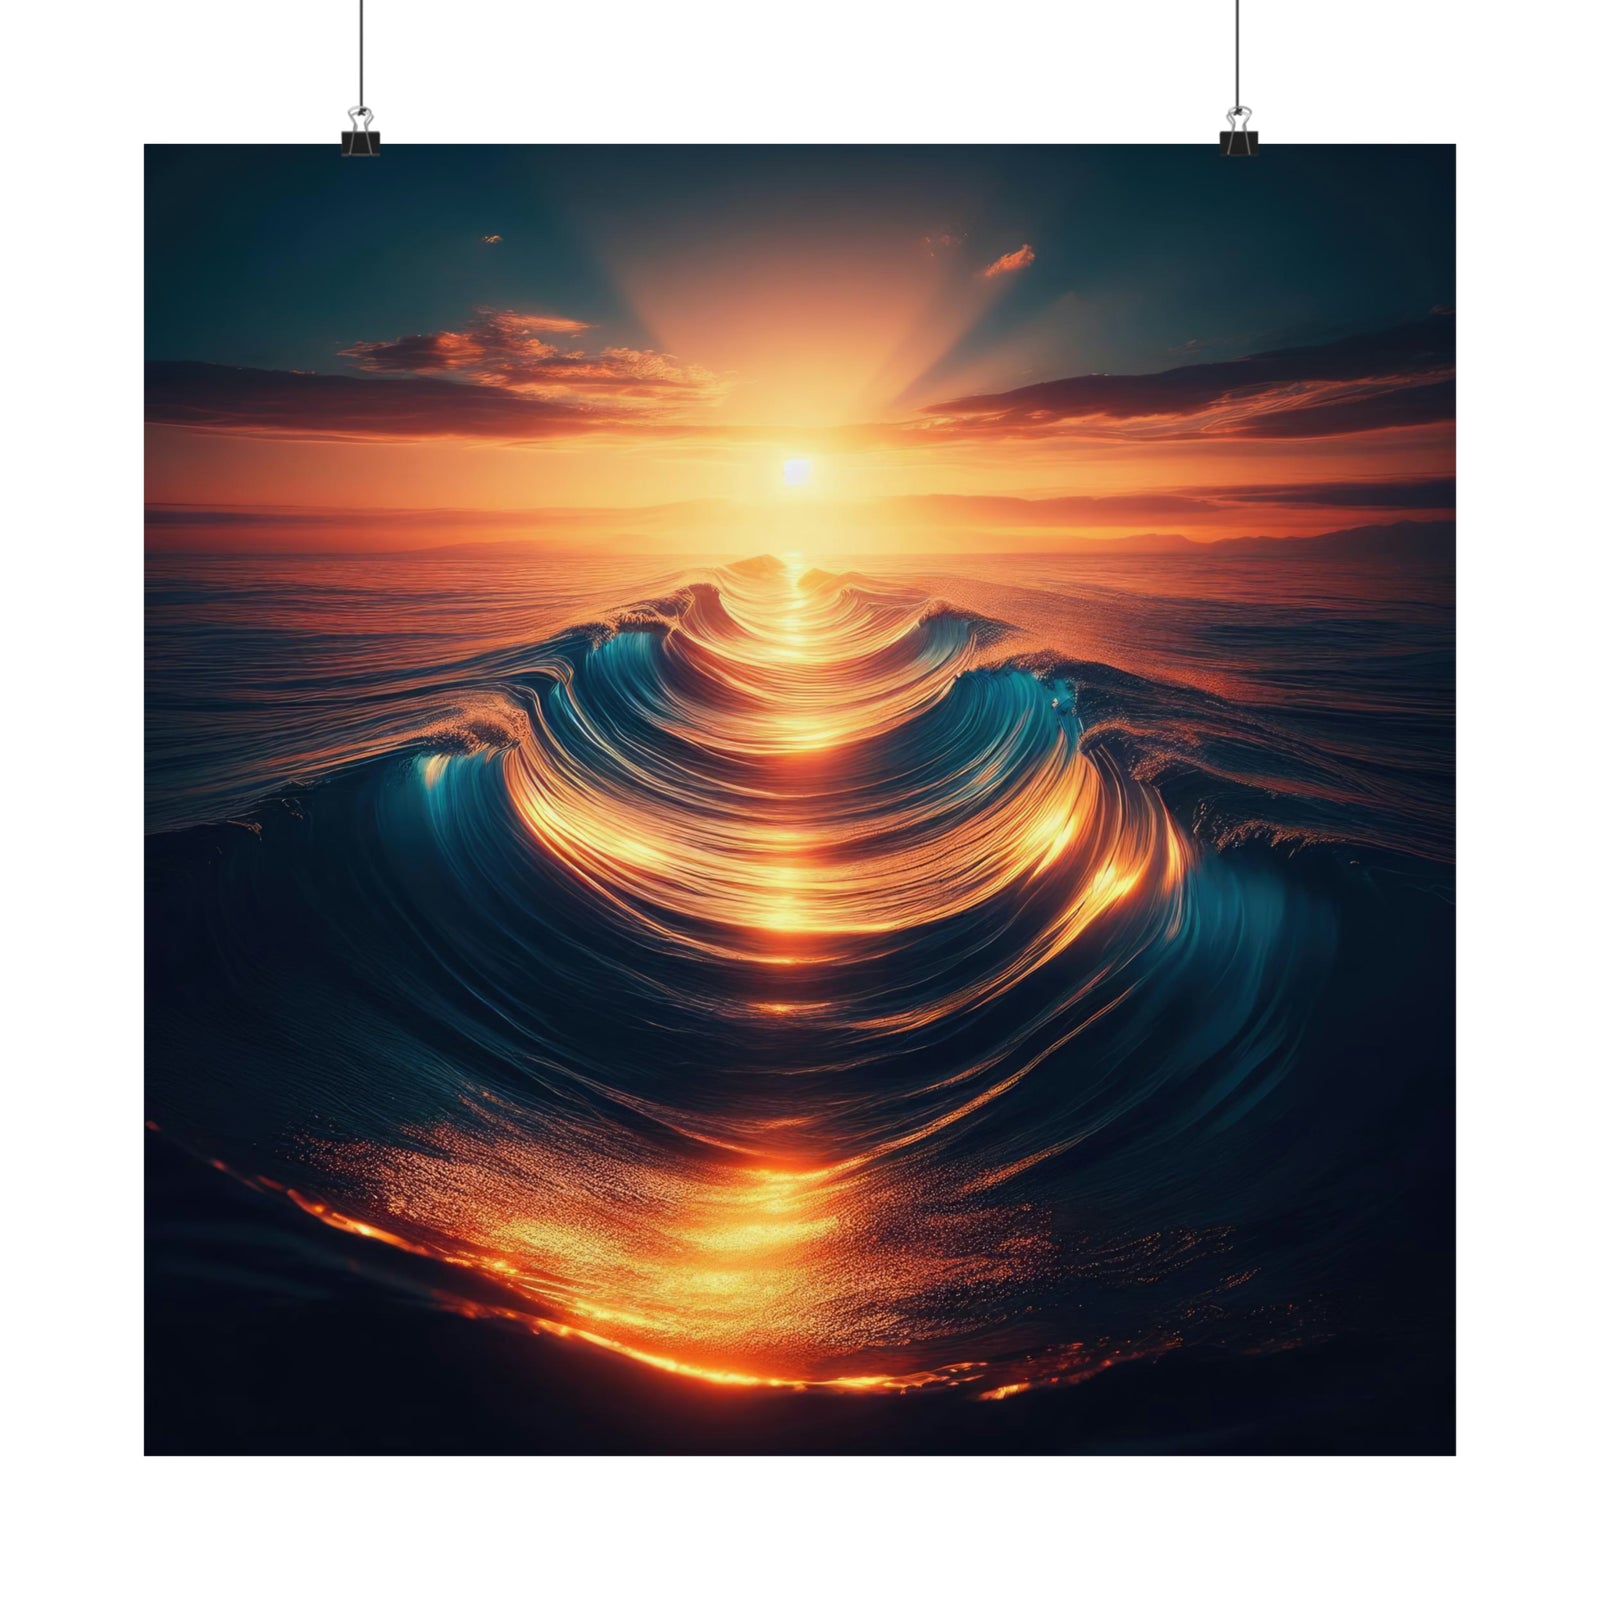 Tranquility by the Sea Poster